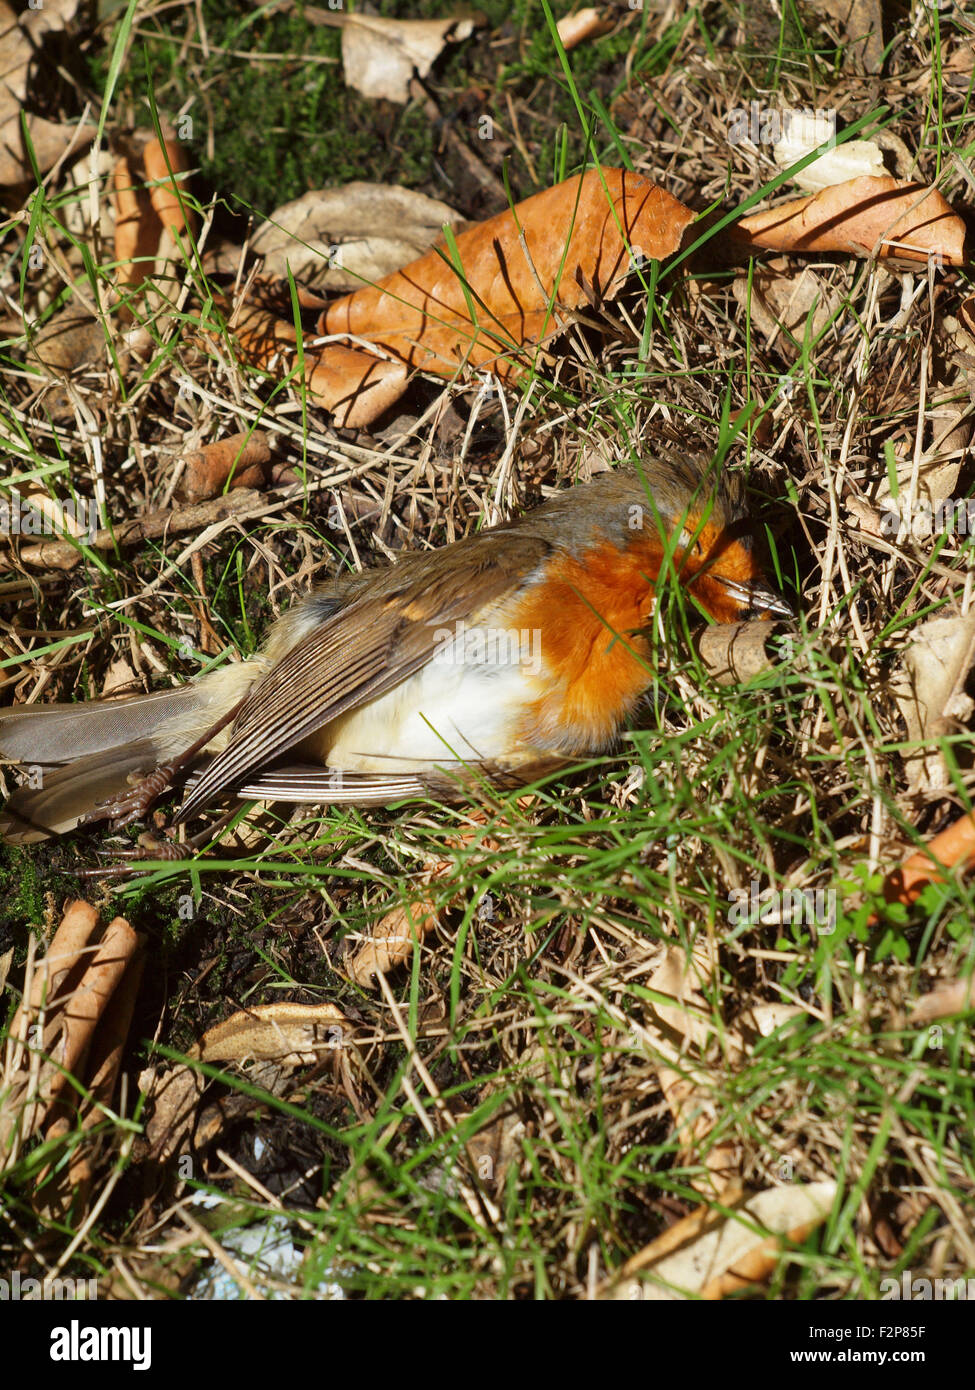 Newcastle Upon Tyne, 22nd September 2015, Uk News. A dead European, insectivorus passerine Robin (Erithacus Rubecula) found in the suburbs of Tynemouth. Stock Photo